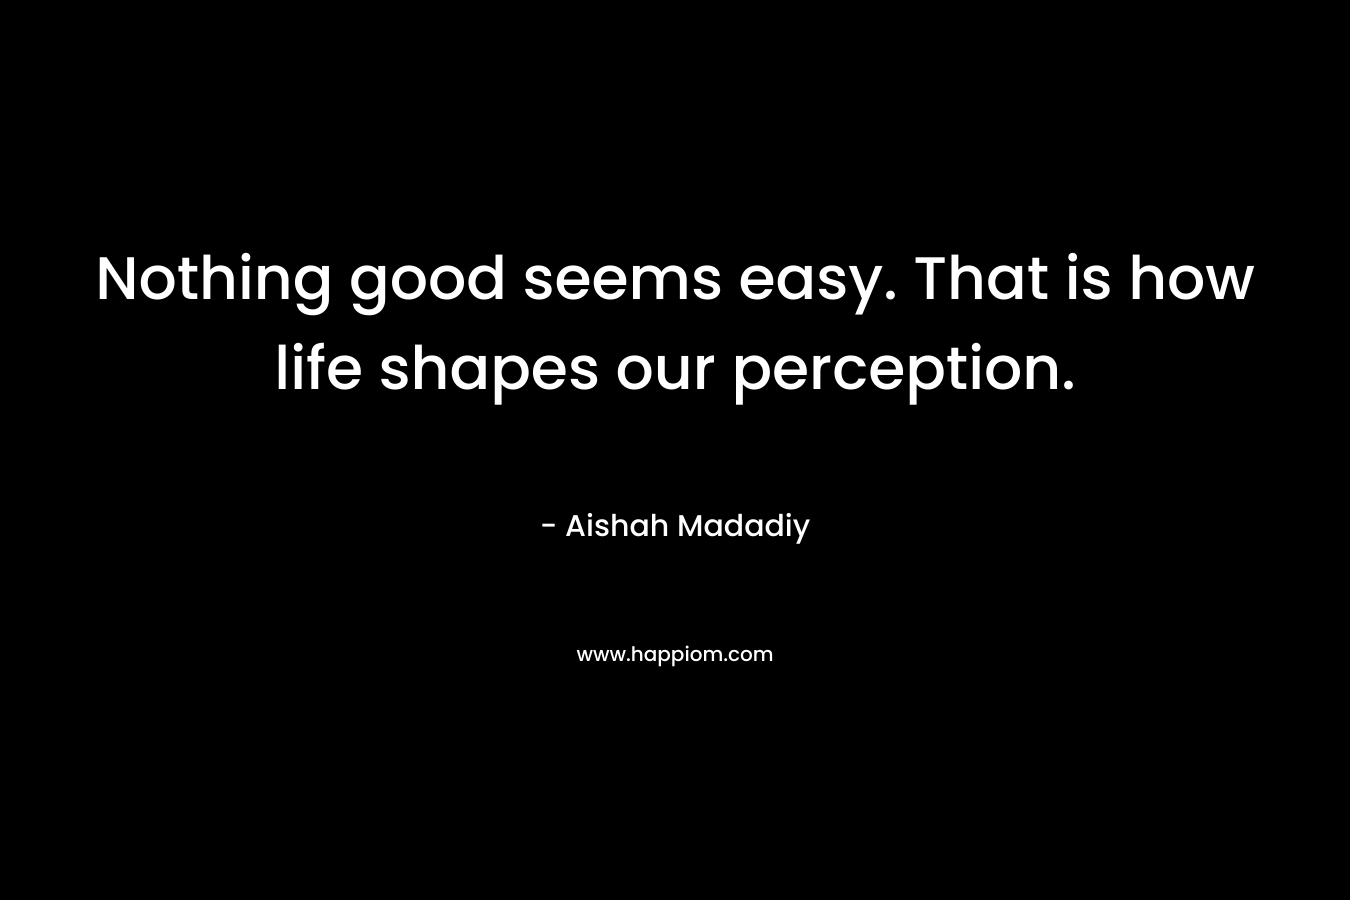 Nothing good seems easy. That is how life shapes our perception.